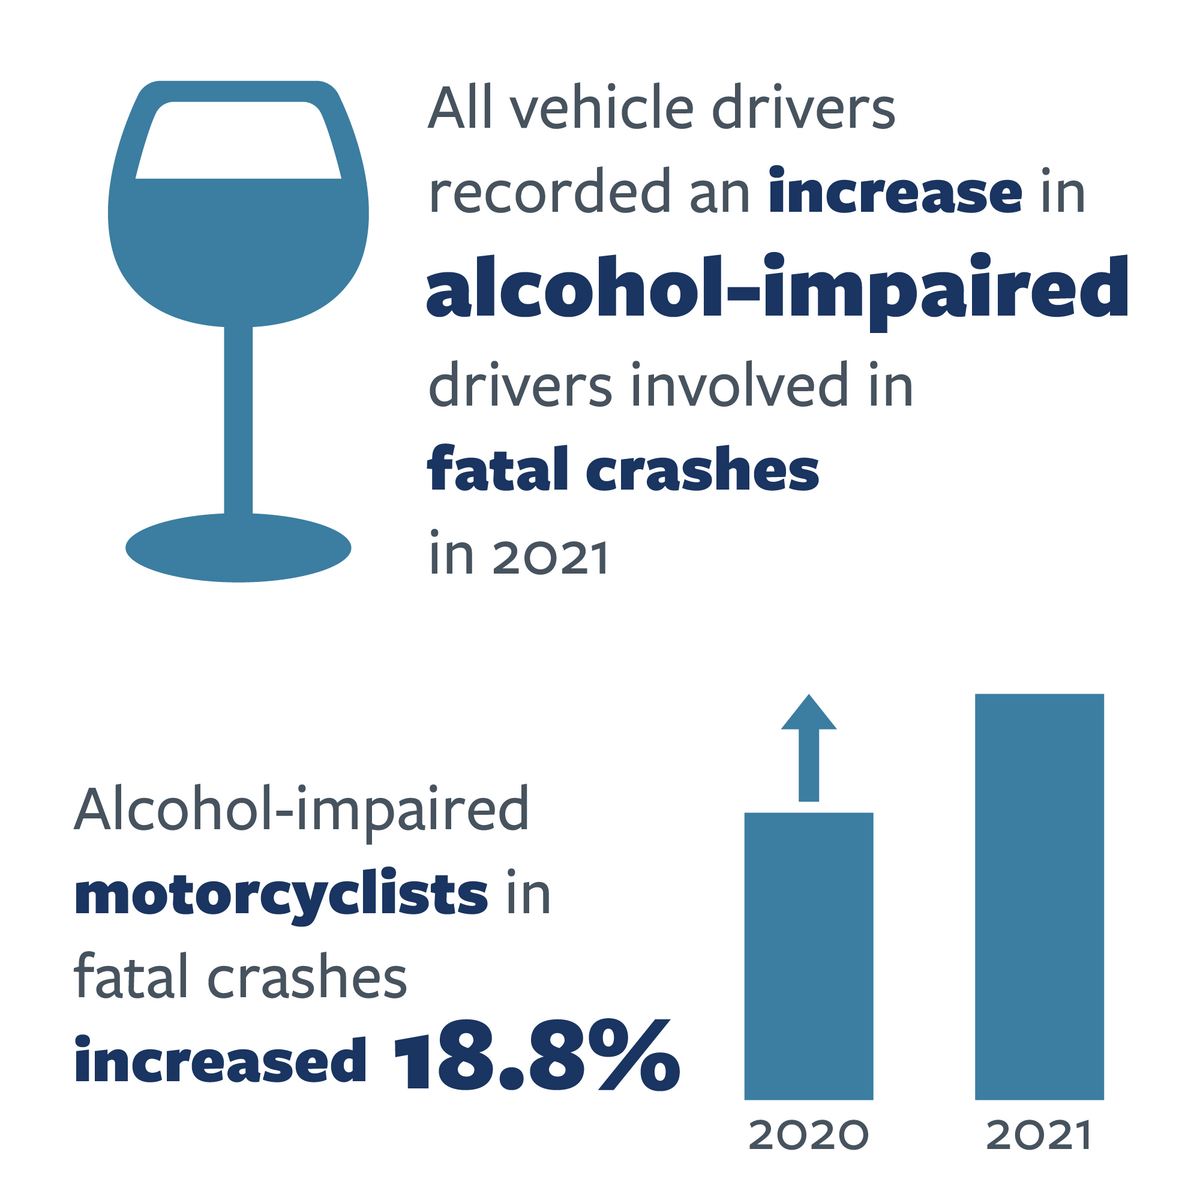  Infographic detailing alcohol-impaired driving across all motor vehicle users  and motorcyclists nationwide in 2020 and 2021. For more information, go to the following summary.